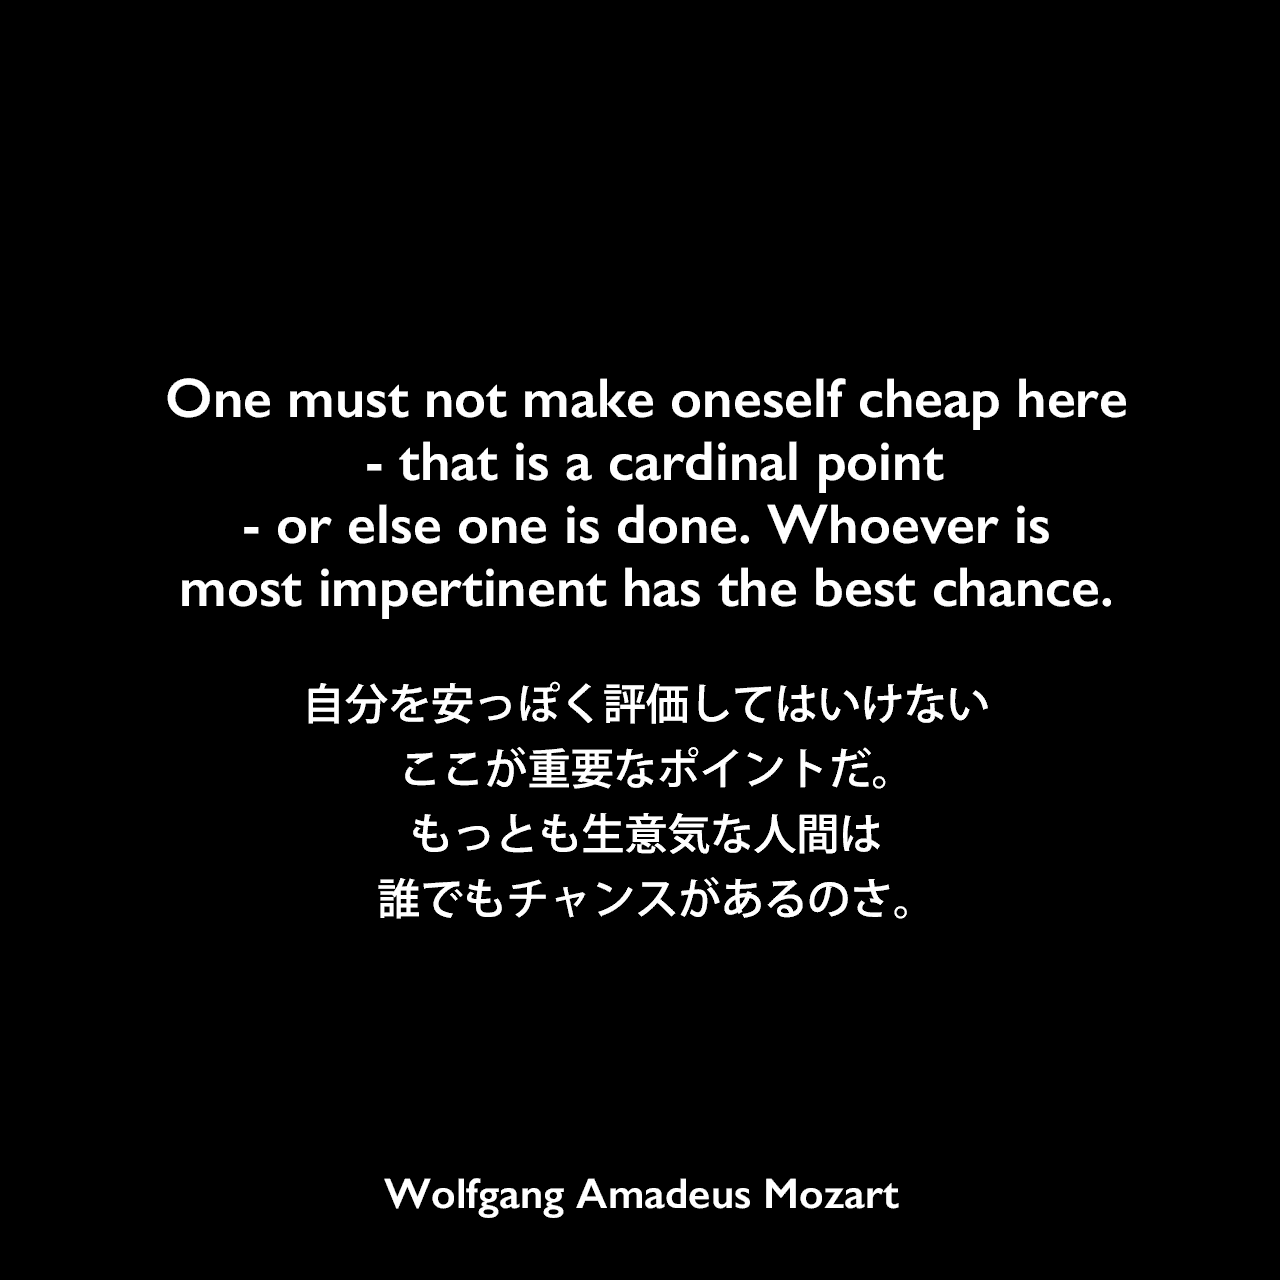 One must not make oneself cheap here - that is a cardinal point - or else one is done. Whoever is most impertinent has the best chance.自分を安っぽく評価してはいけない、ここが重要なポイントだ。もっとも生意気な人間は誰でもチャンスがあるのさ。Wolfgang Amadeus Mozart